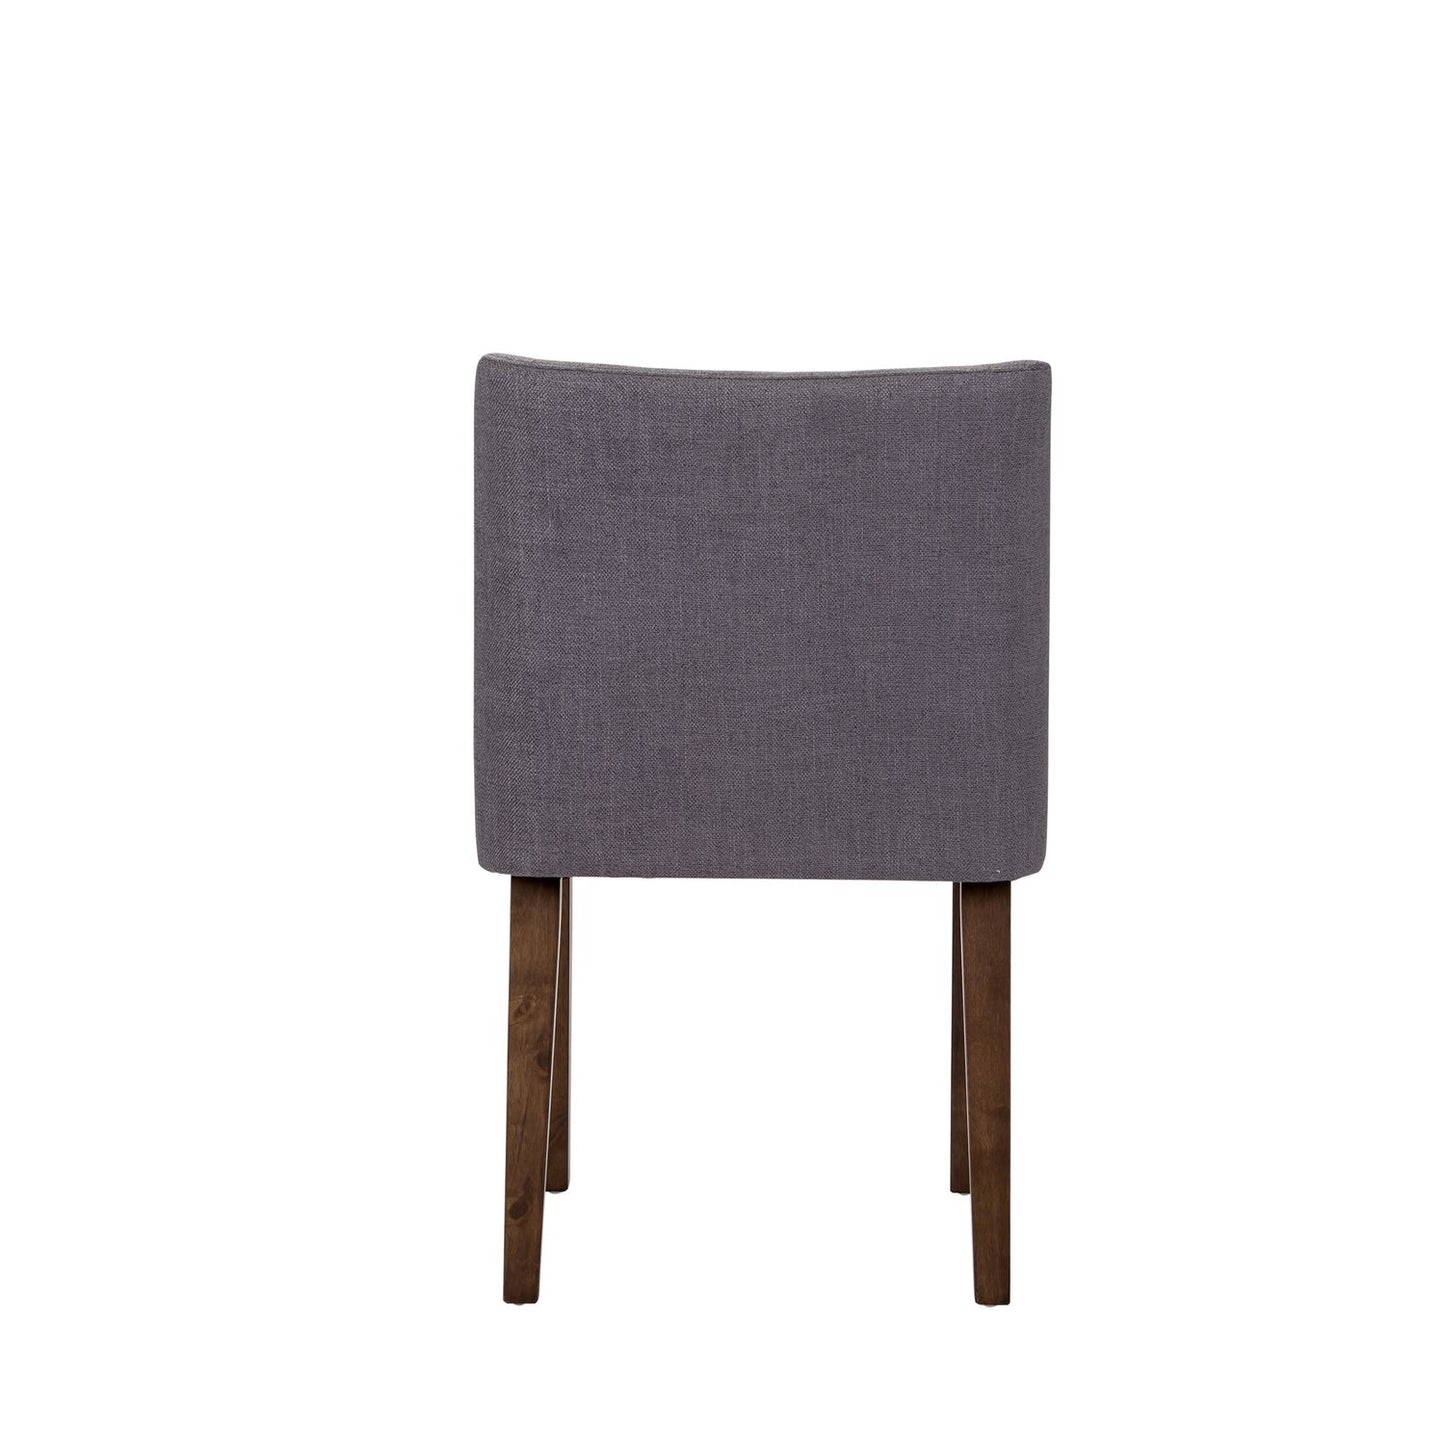 Space Savers Group Nido Dining Or Accent Chair Grey